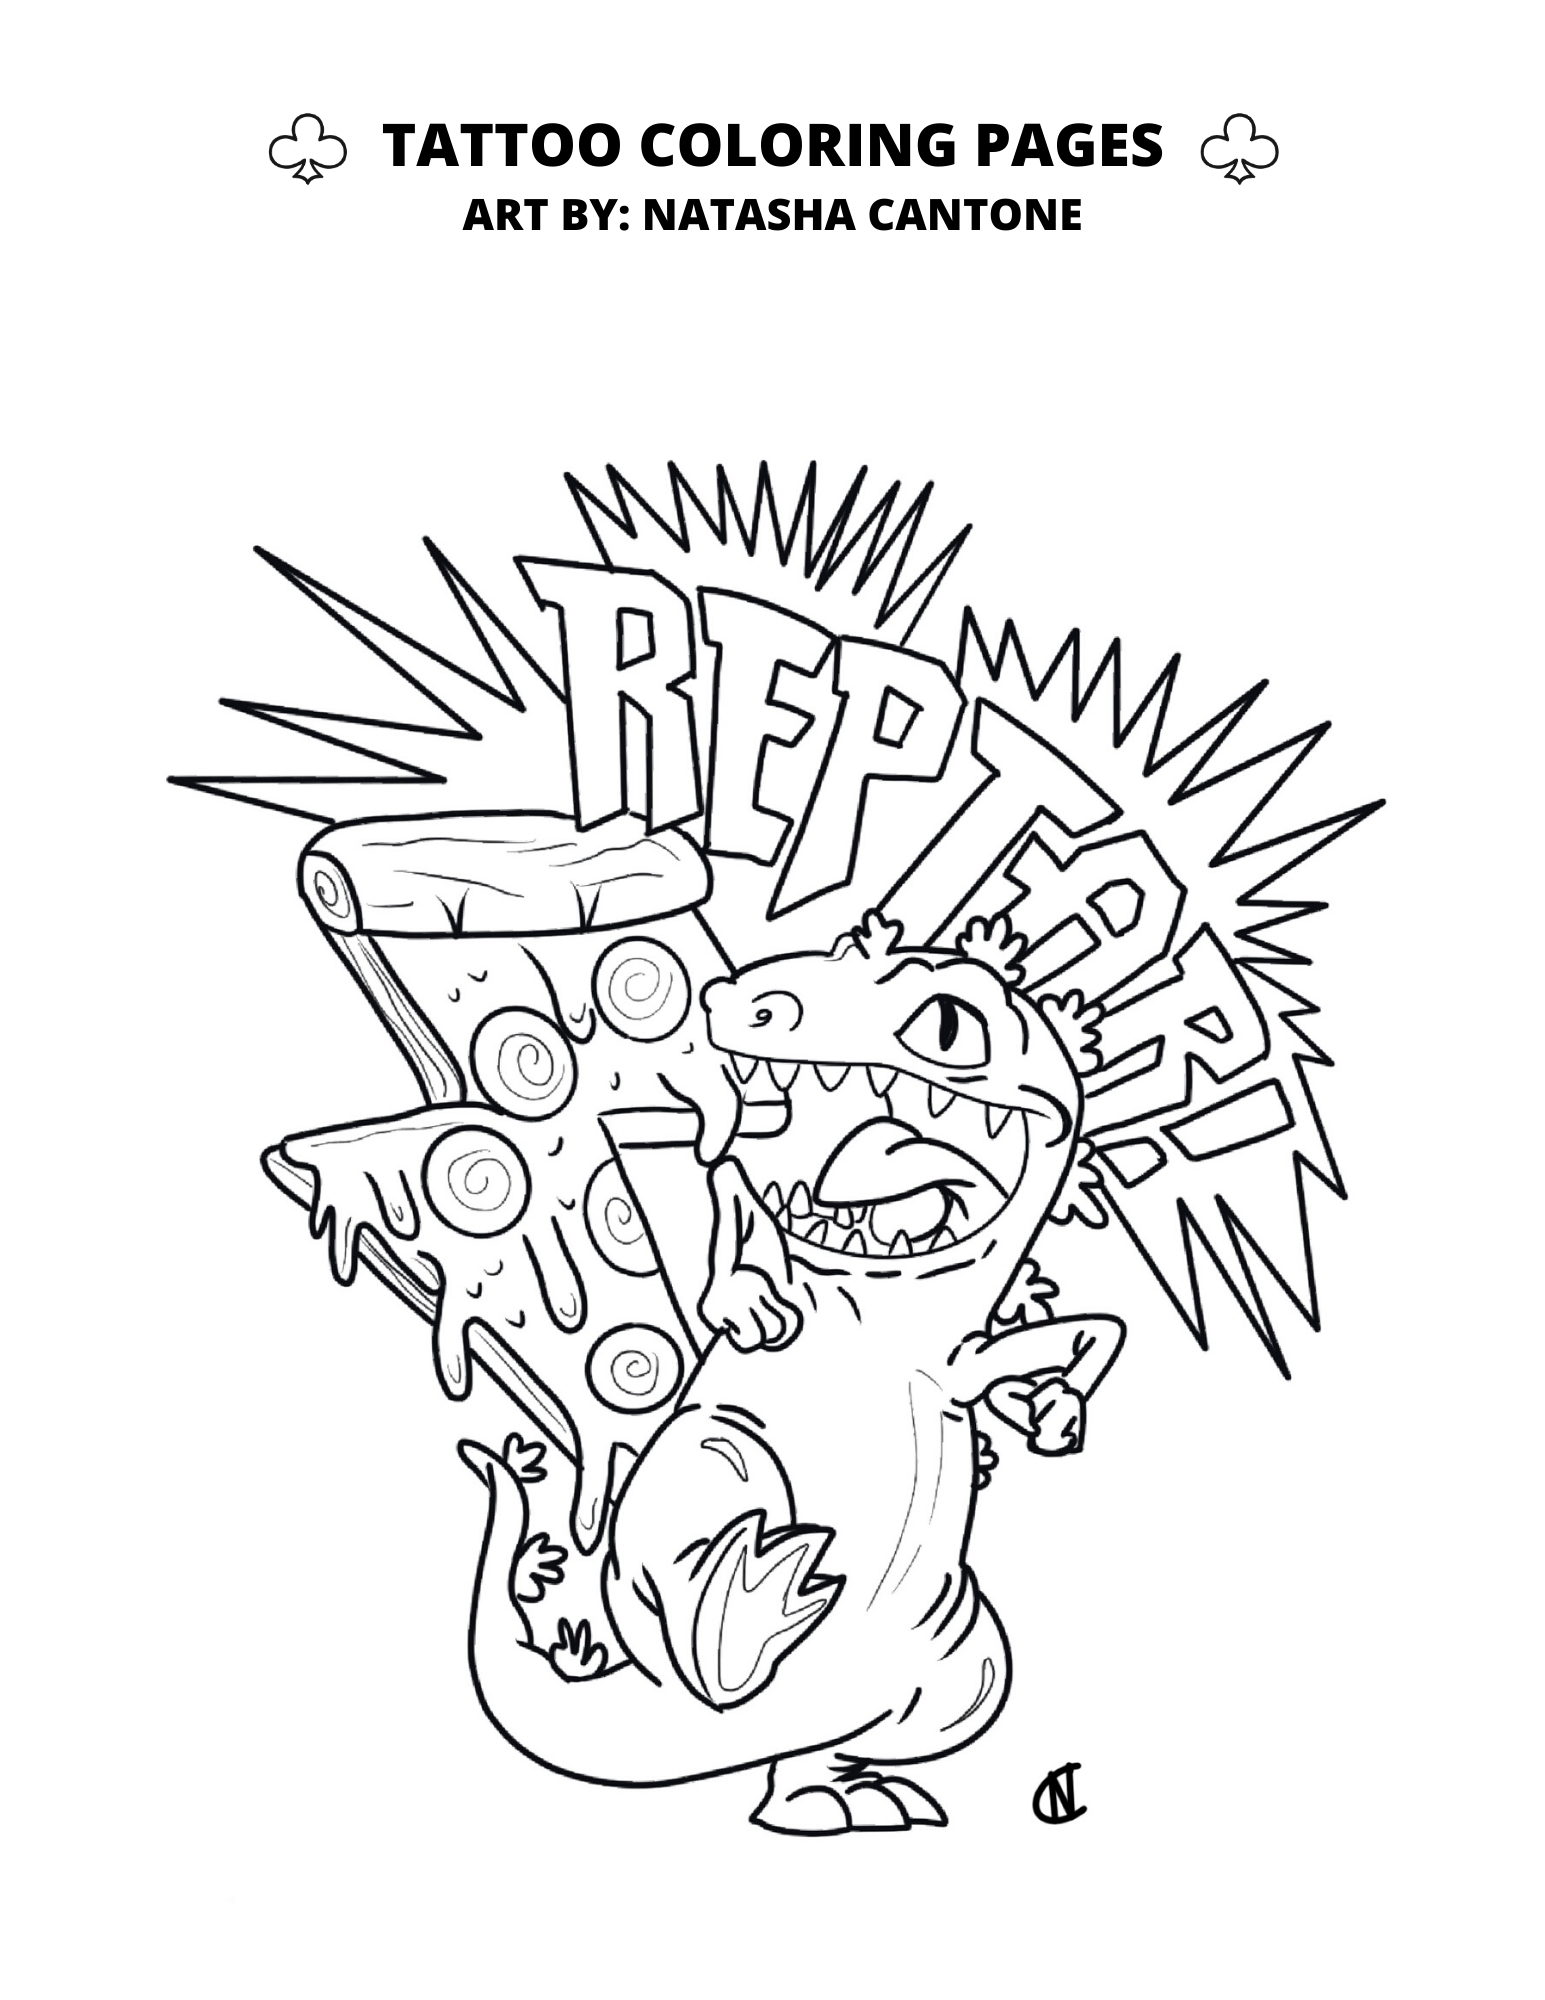 Tattoo Coloring Pages - Club Tattoo